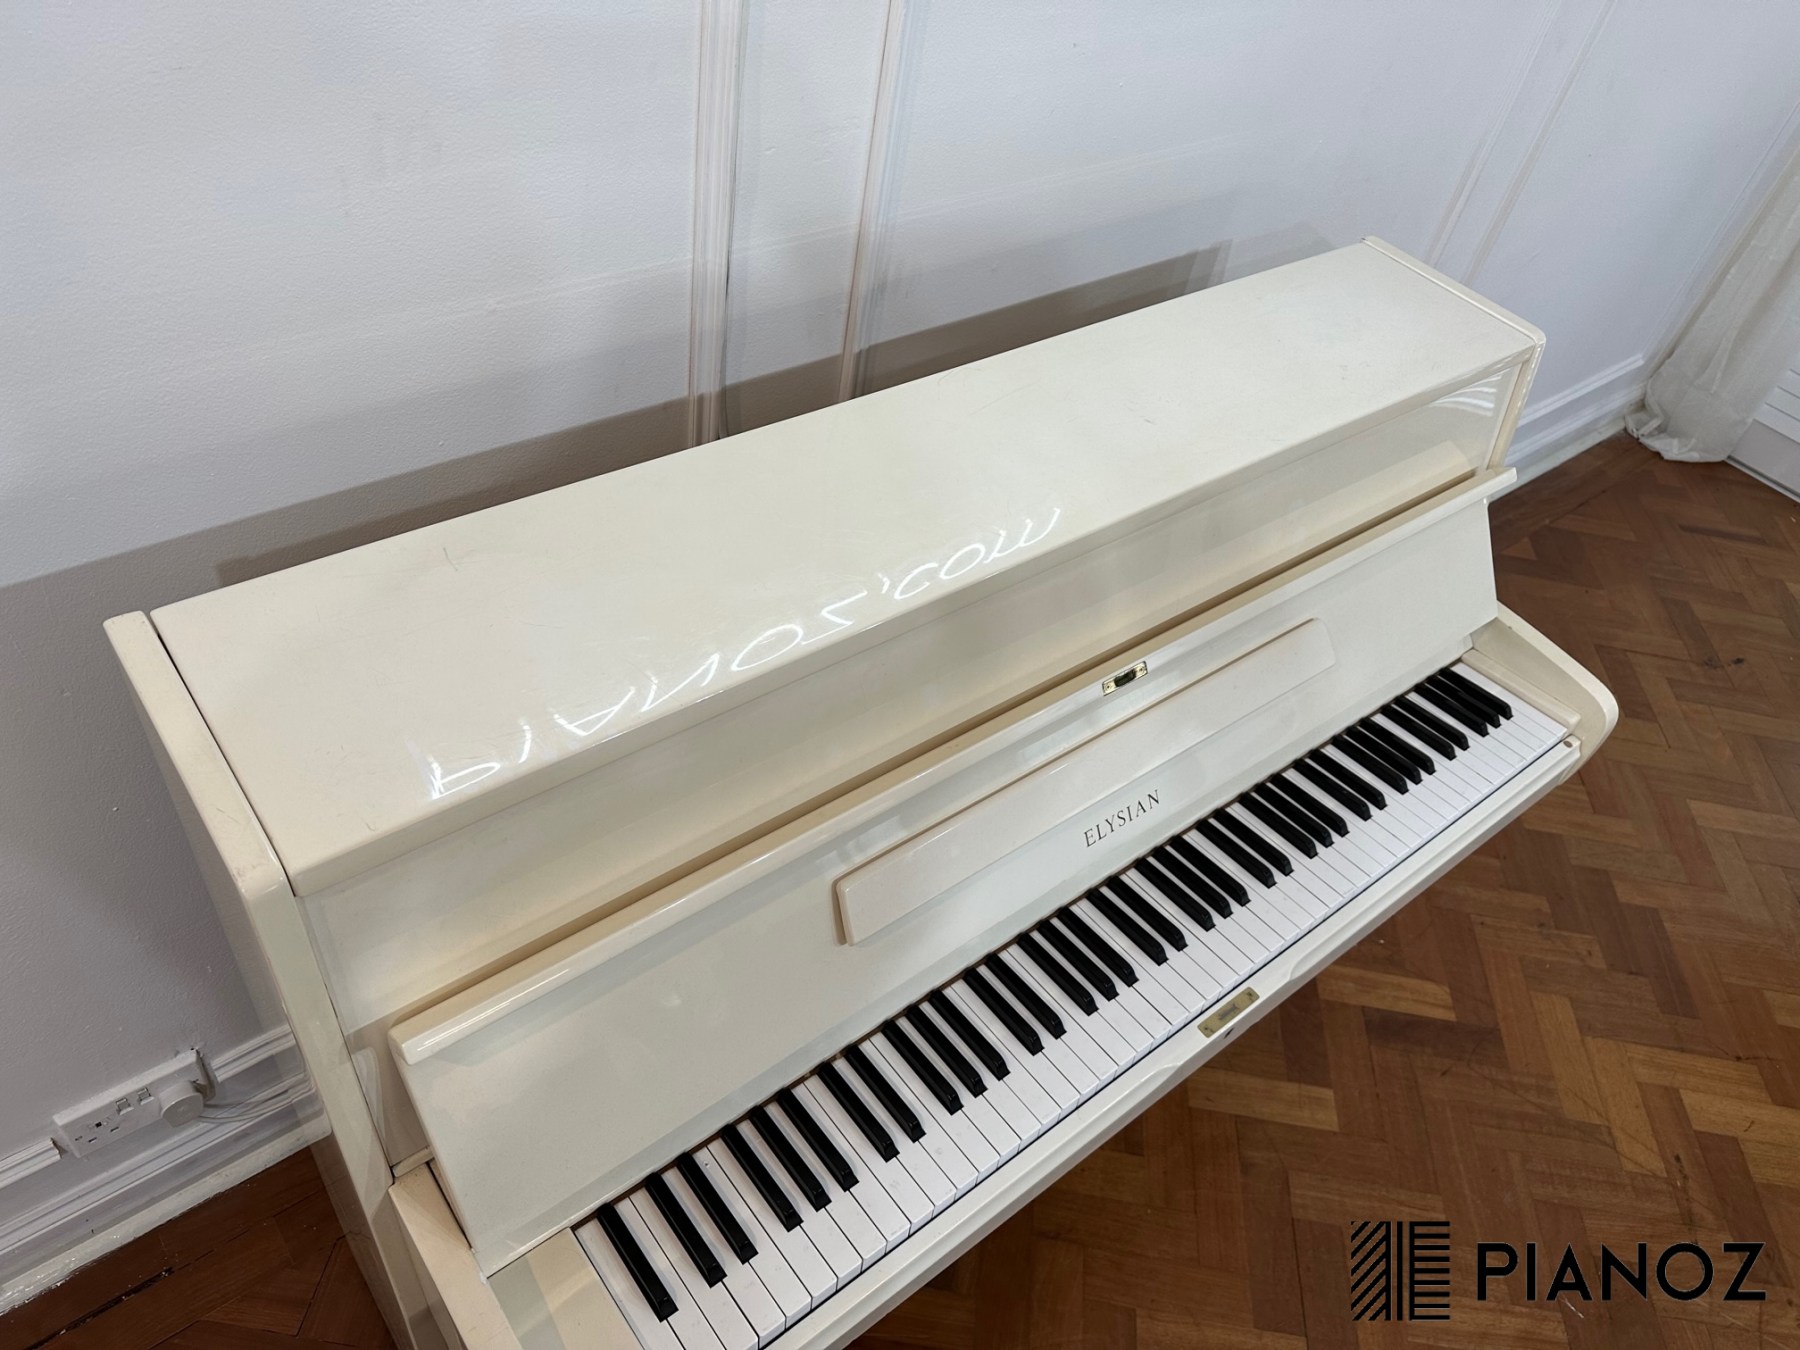 Elysian White Upright Piano piano for sale in UK